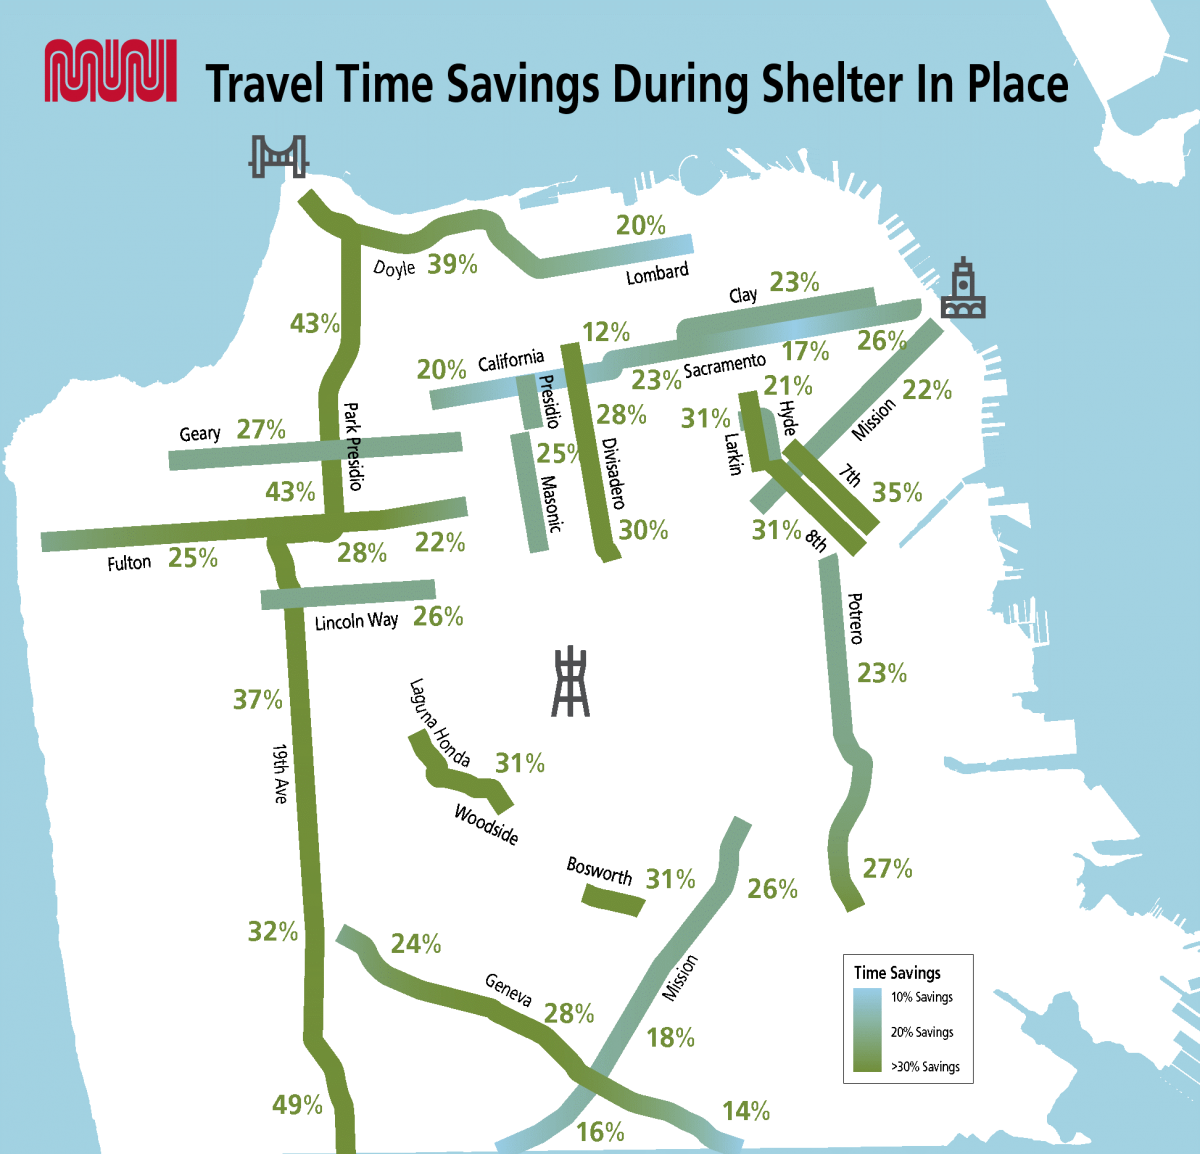 Map showing Muni travel time savings on several corridors during shelter-in-place